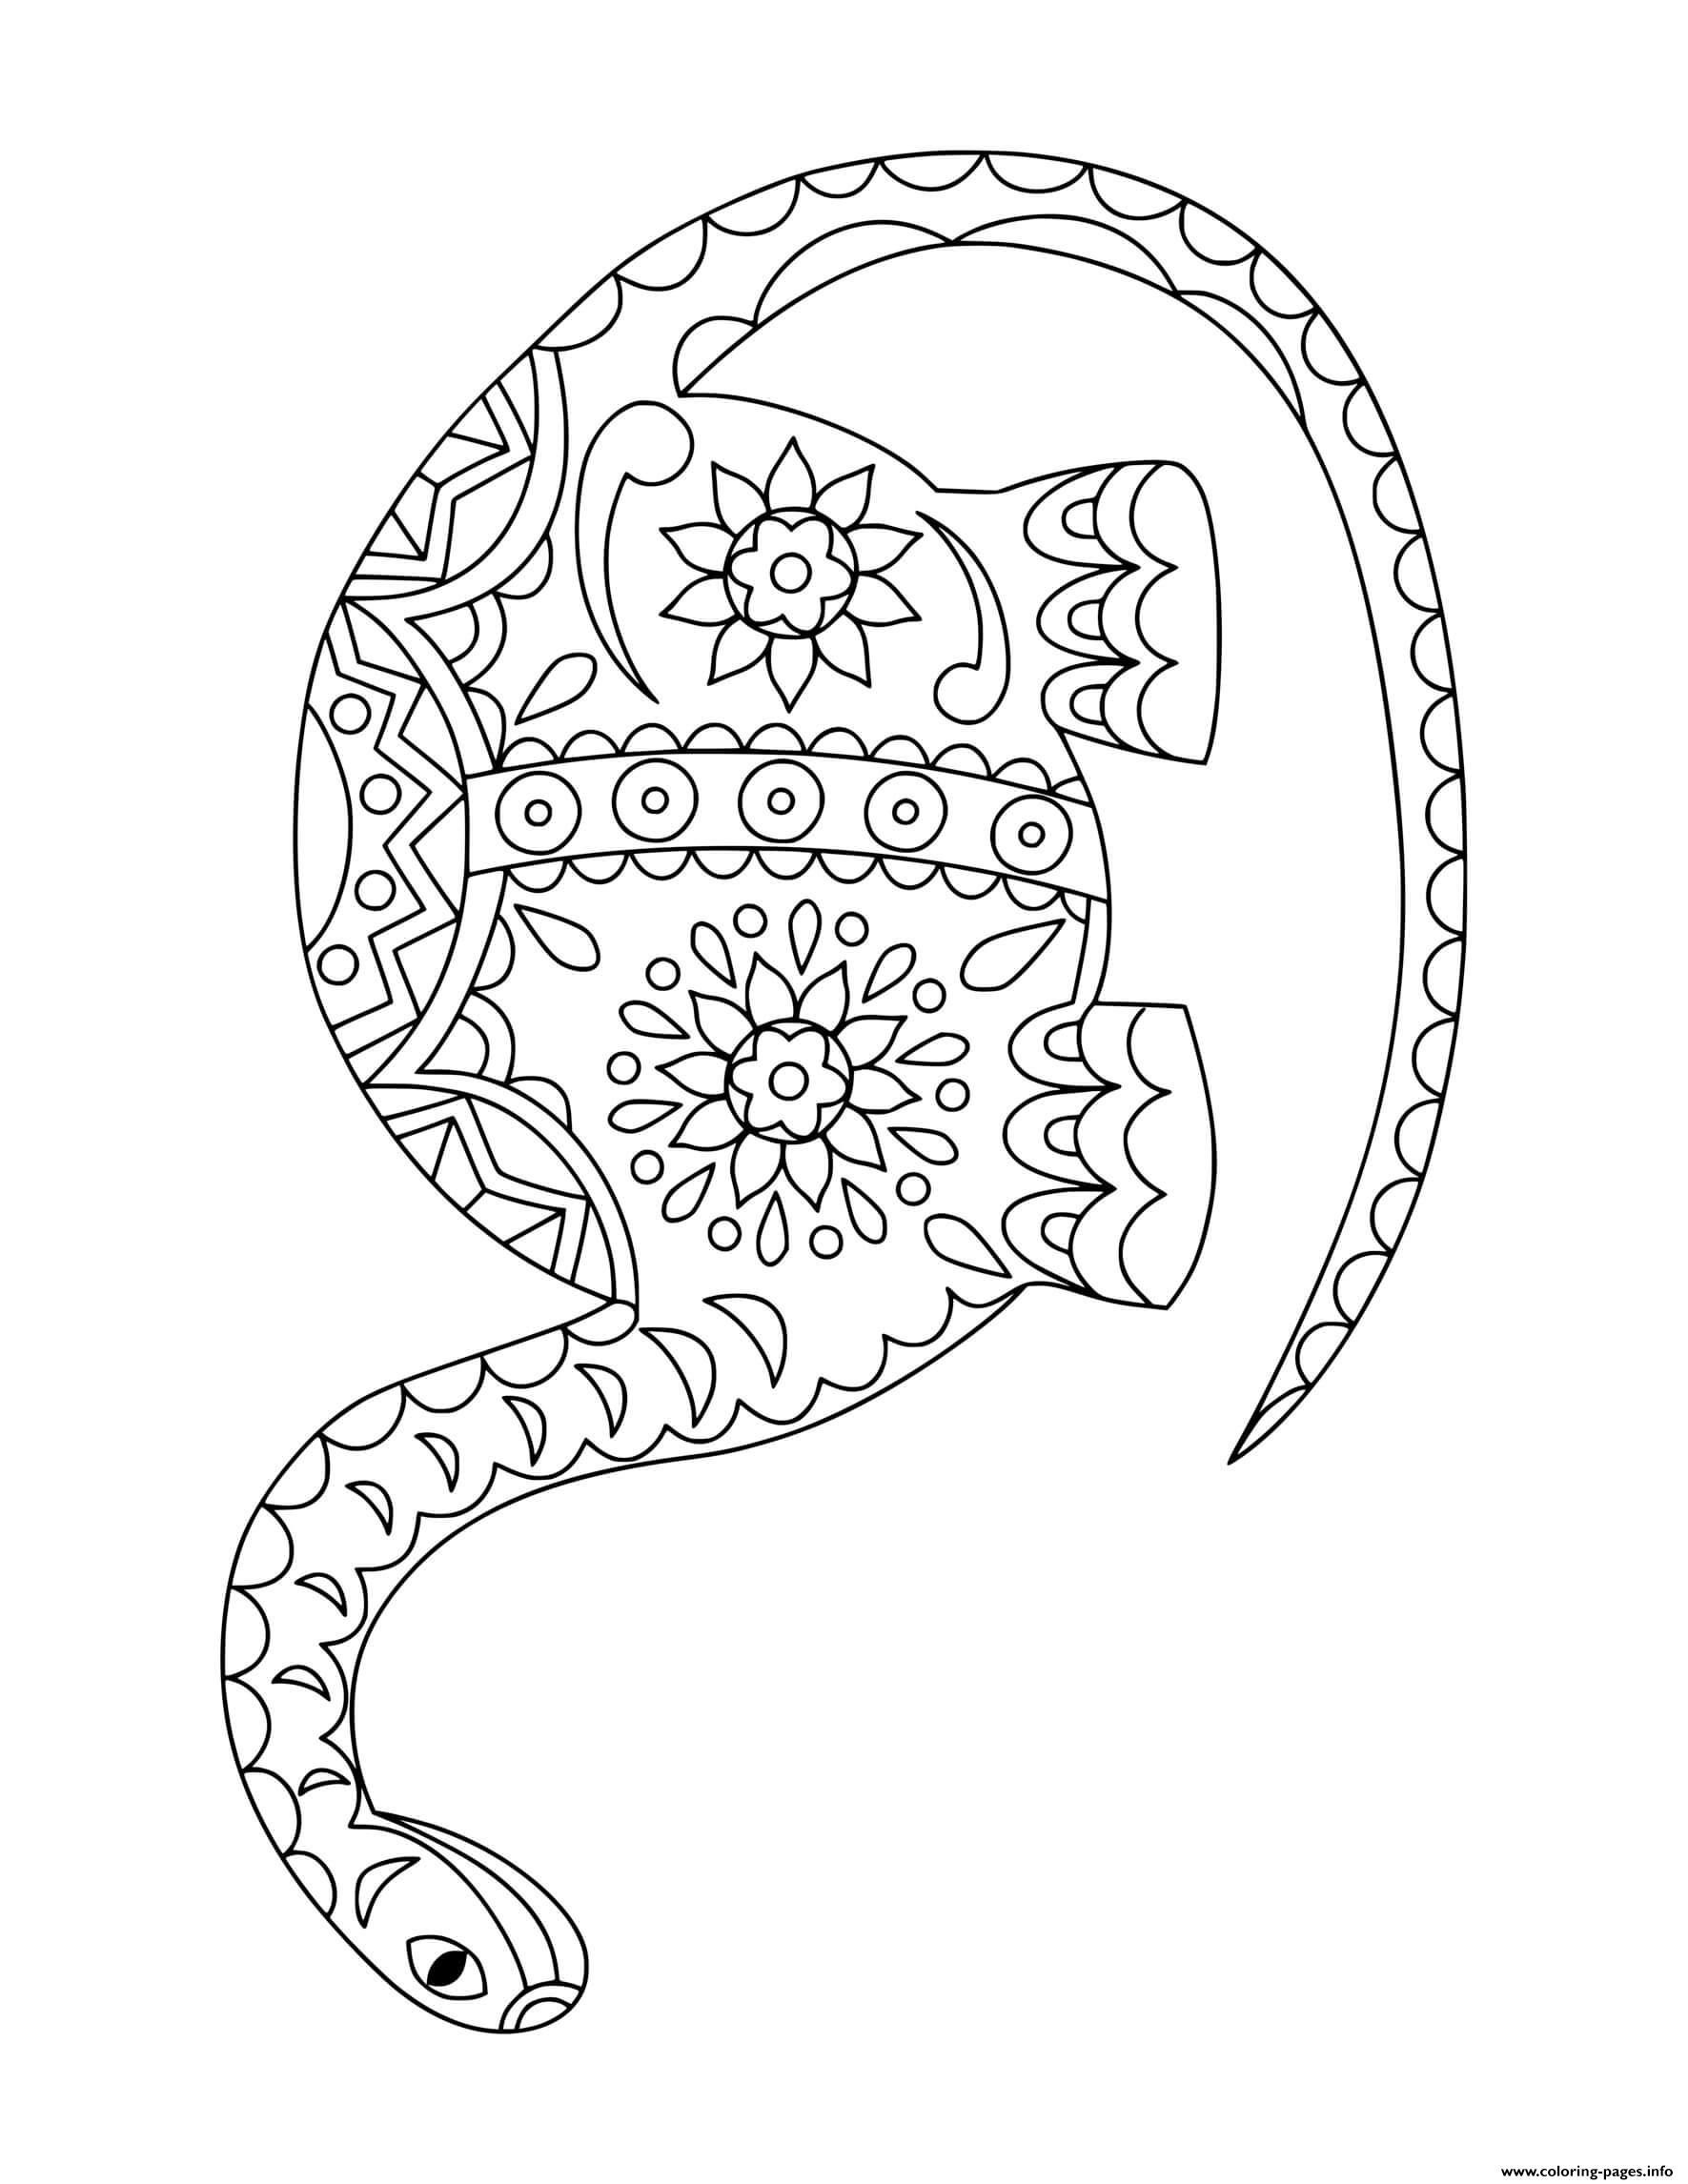 Dinosaur Intricate Pattern Doodle For Adults coloring